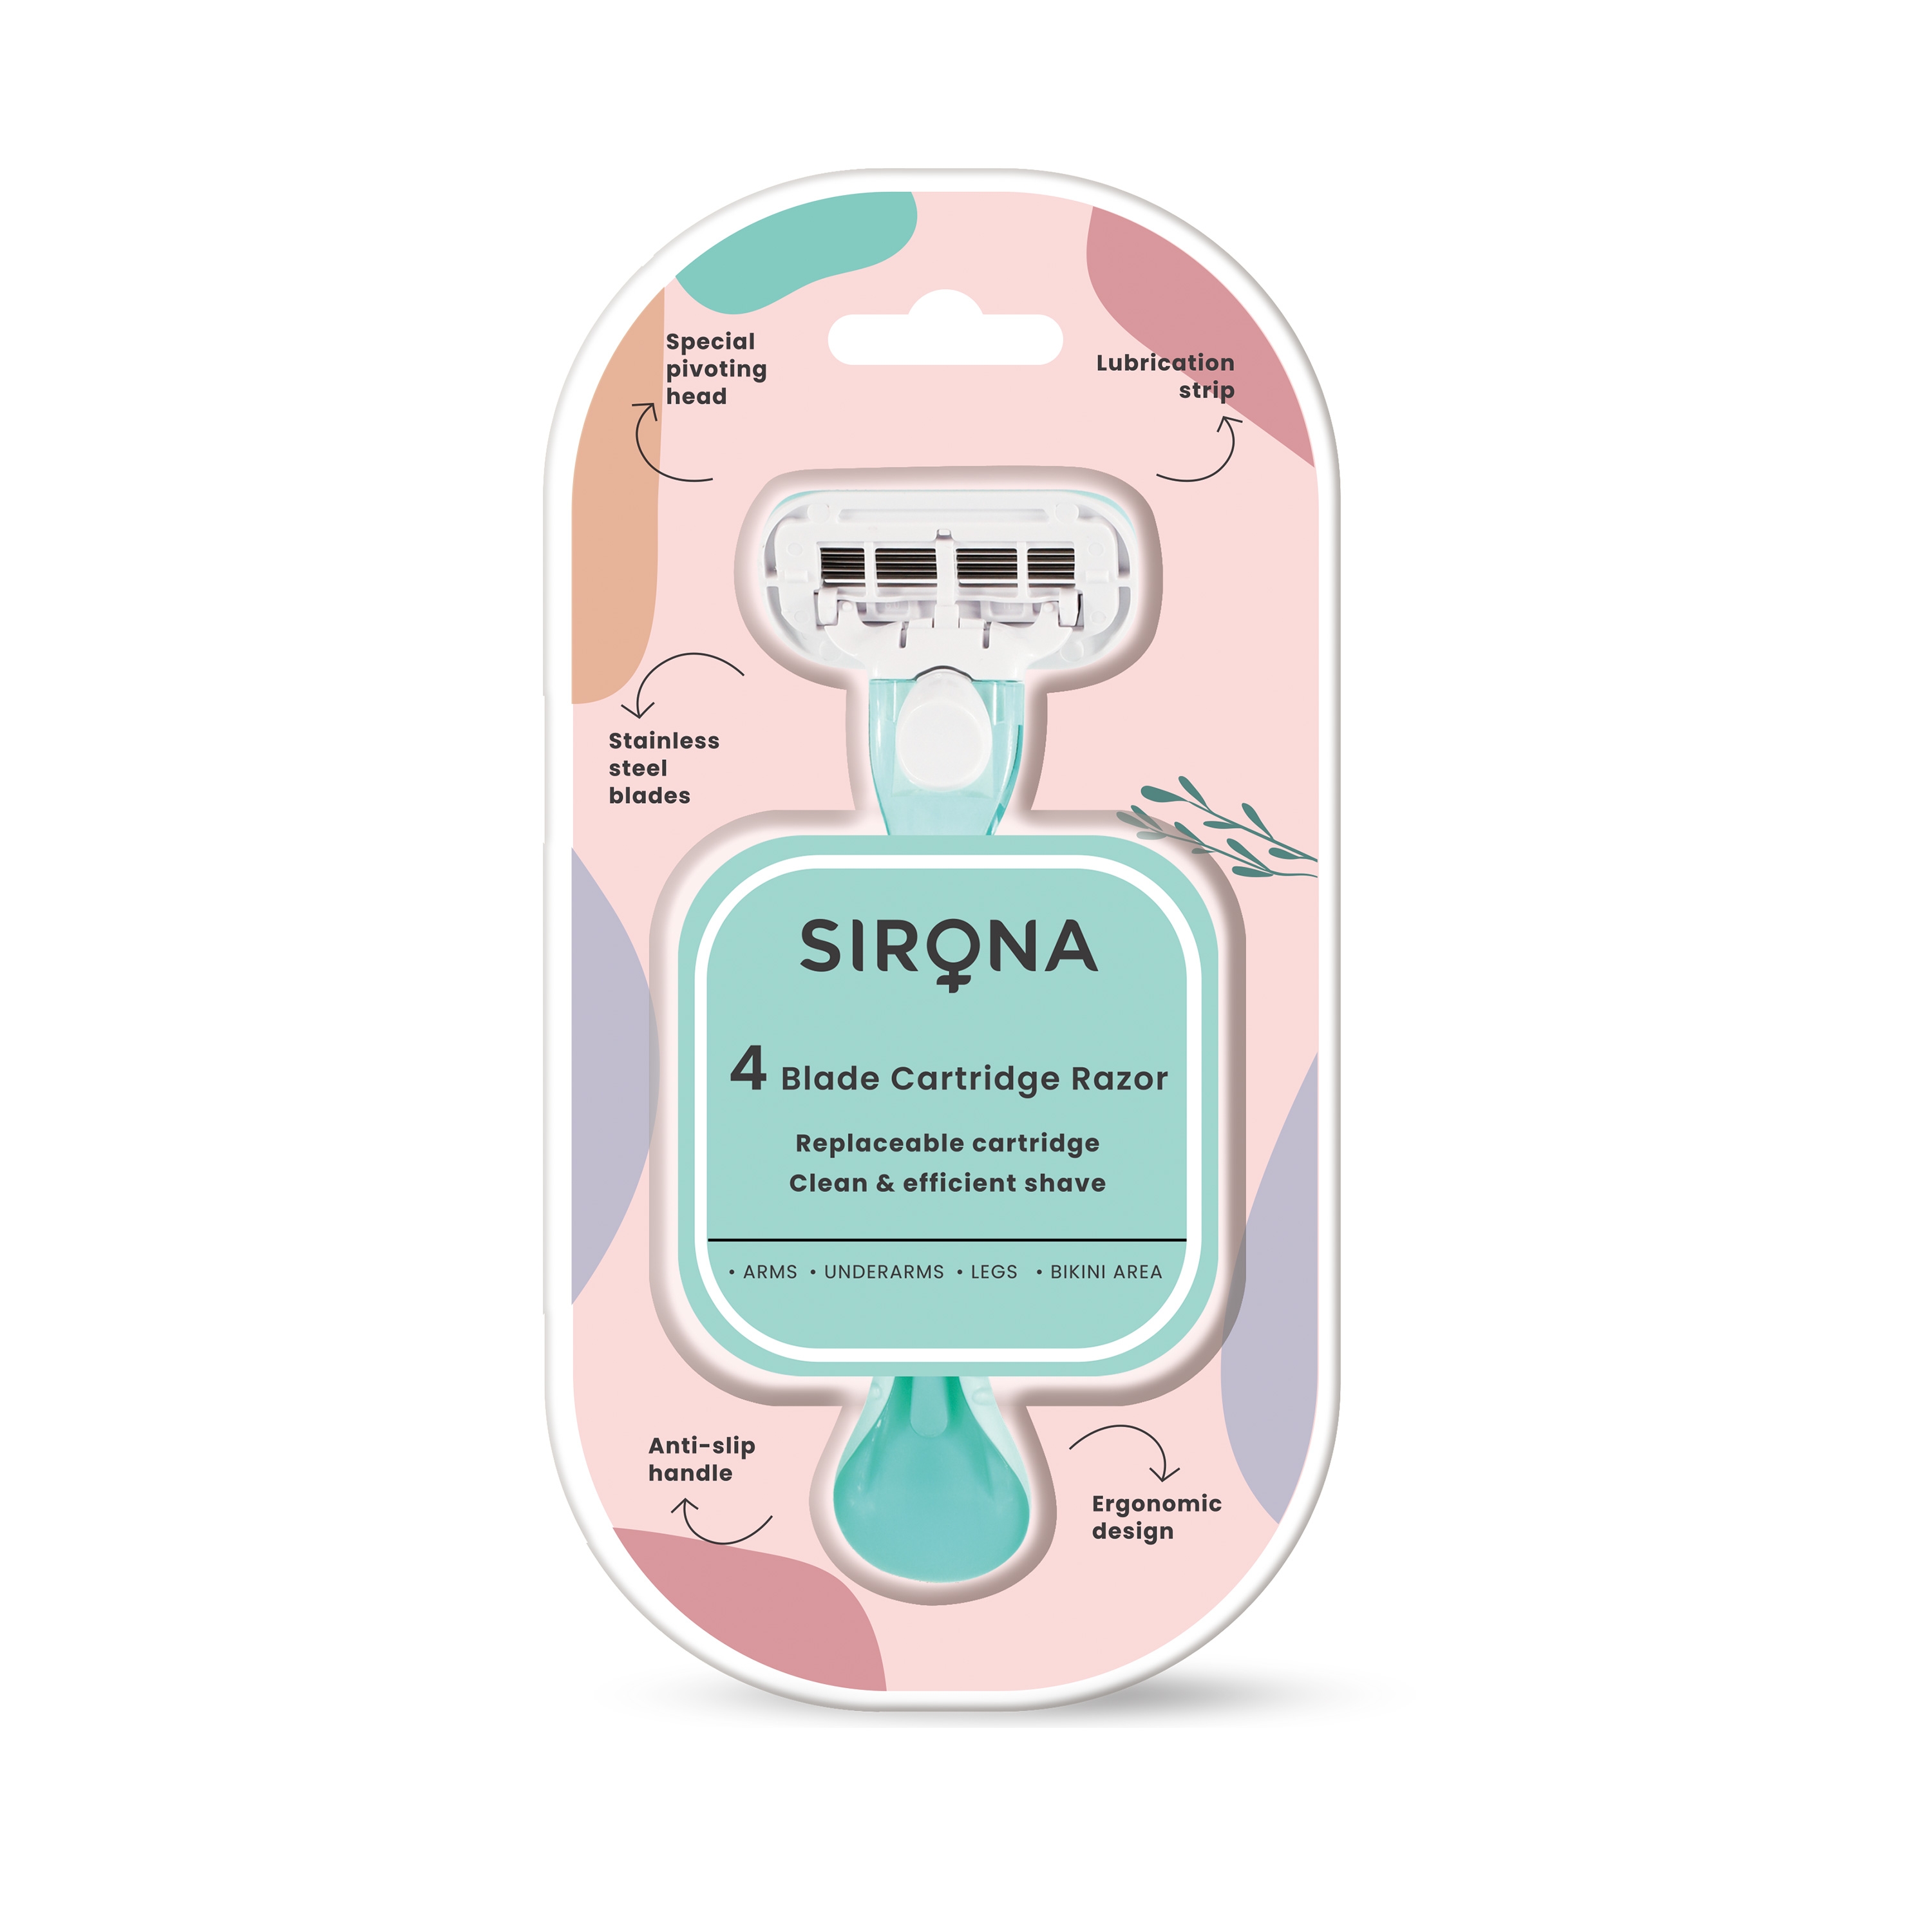 Sirona | Sirona Hair Removal Razor For Women With Aloe Vera & Vitamin E Lubrication – 1 Pcs With 4 Swedish Stainless Steel Blade & Replaceable Cartridge For Clean & Effective Shave